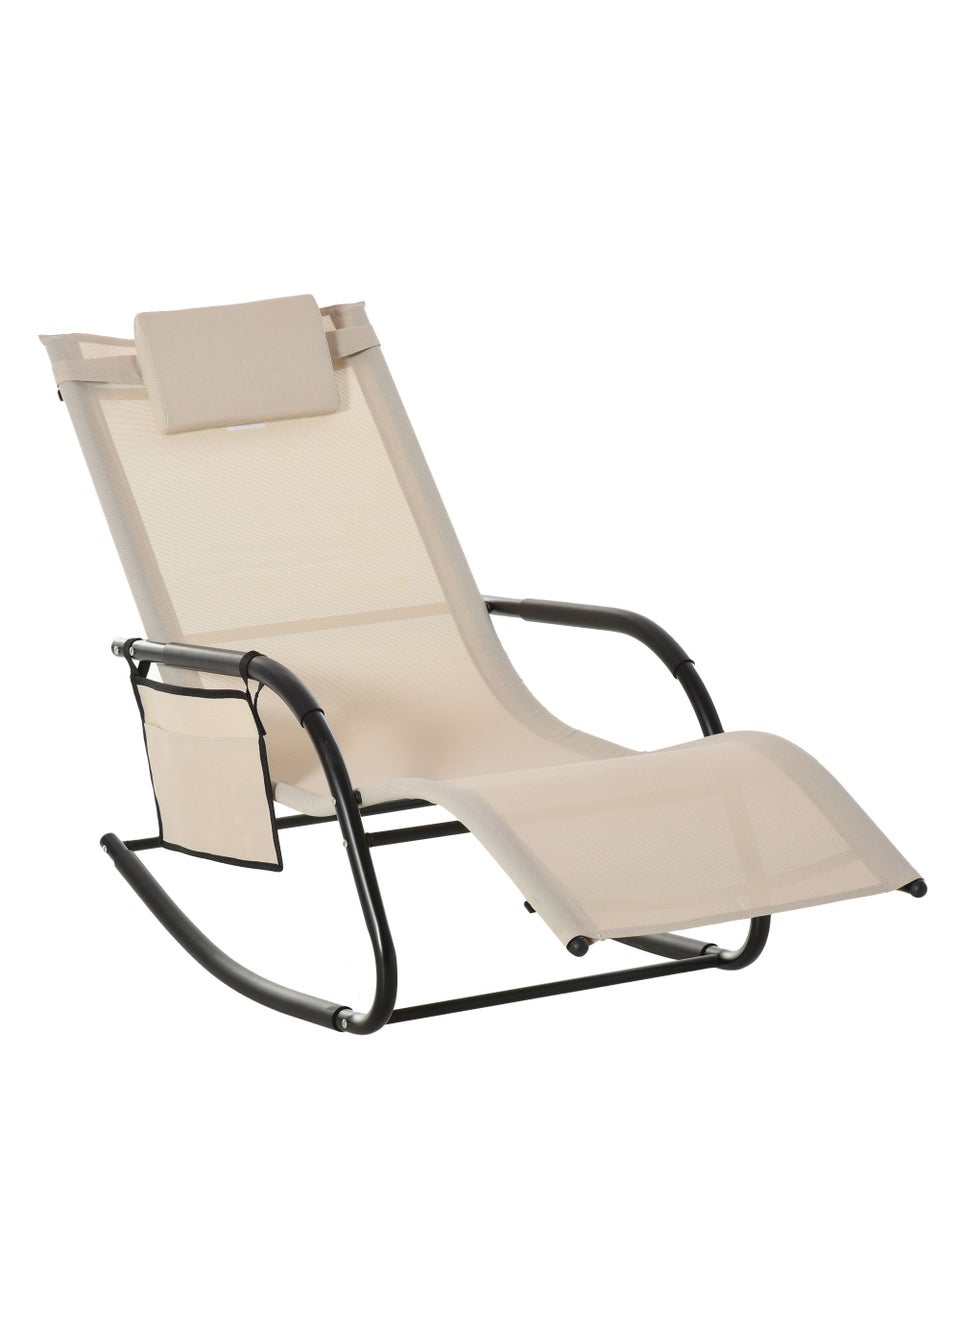 Outsunny Outdoor Garden Rocking Chair, Patio Sun Lounger Rocker Chair with Breathable Mesh Fabric